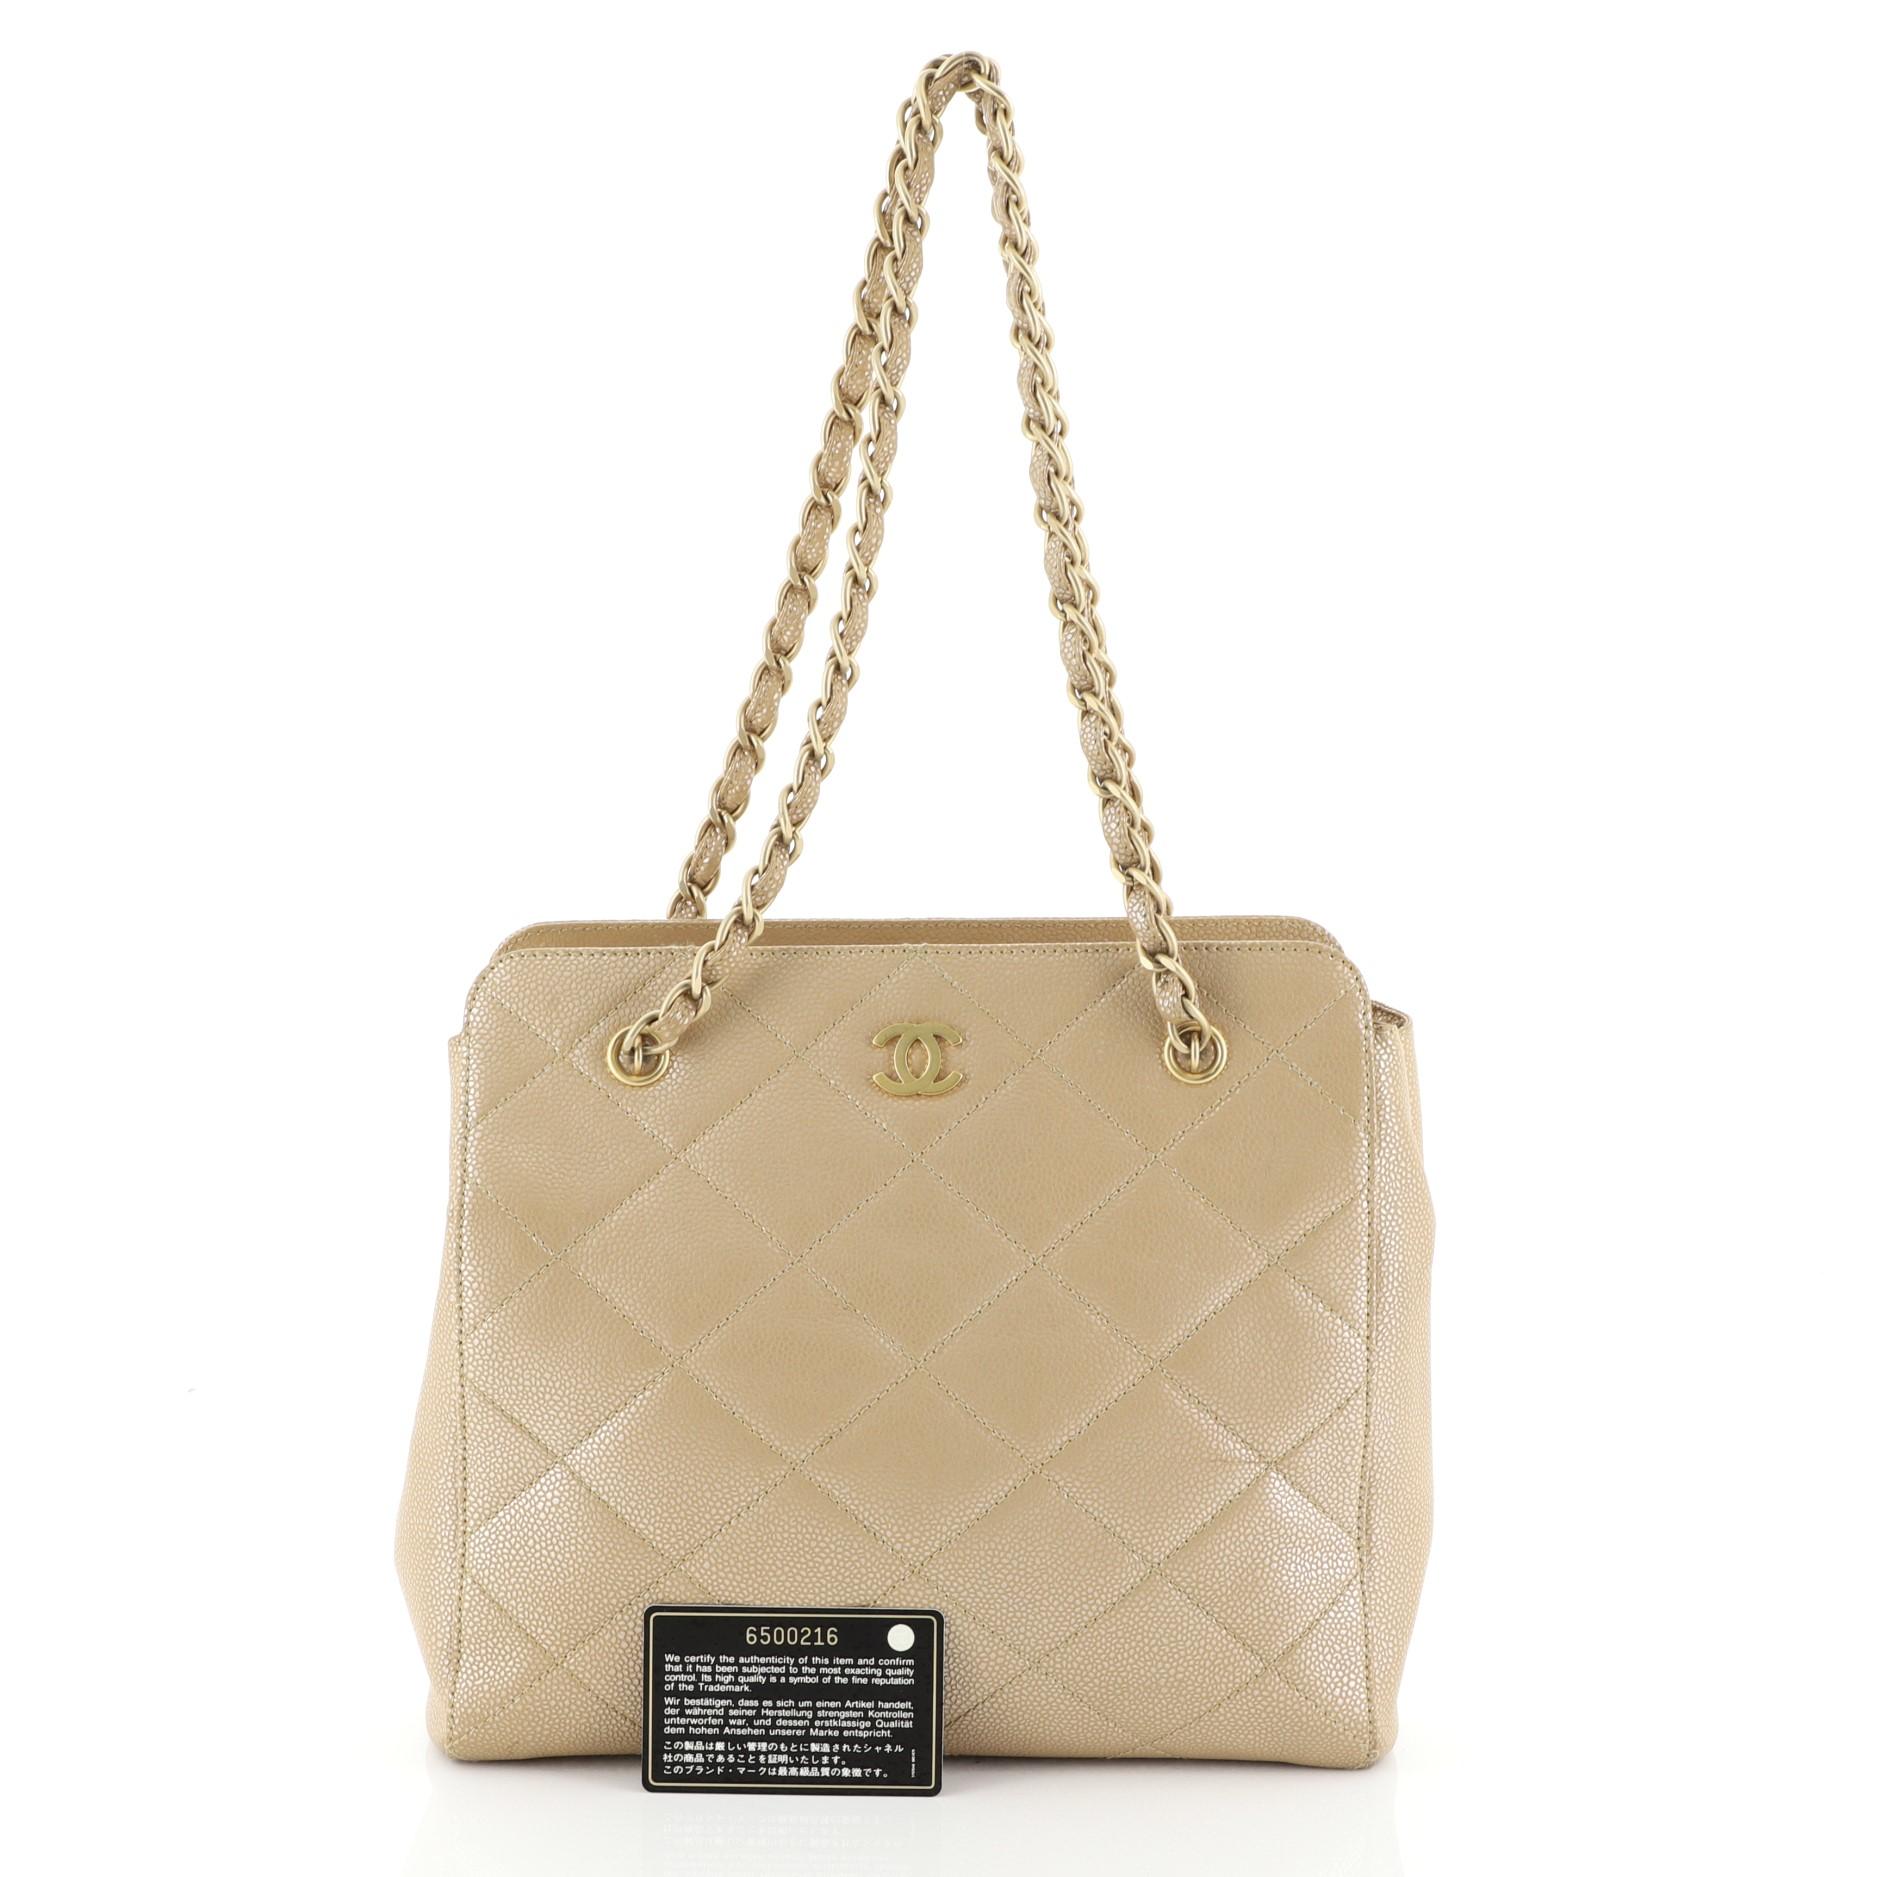 This Chanel Vintage CC Chain Tote Quilted Iridescent Caviar Medium, crafted from neutral quilted iridescent caviar leather, features woven-in leather chain straps and matte gold-tone hardware. It opens to a neutral leather interior with zip pocket.